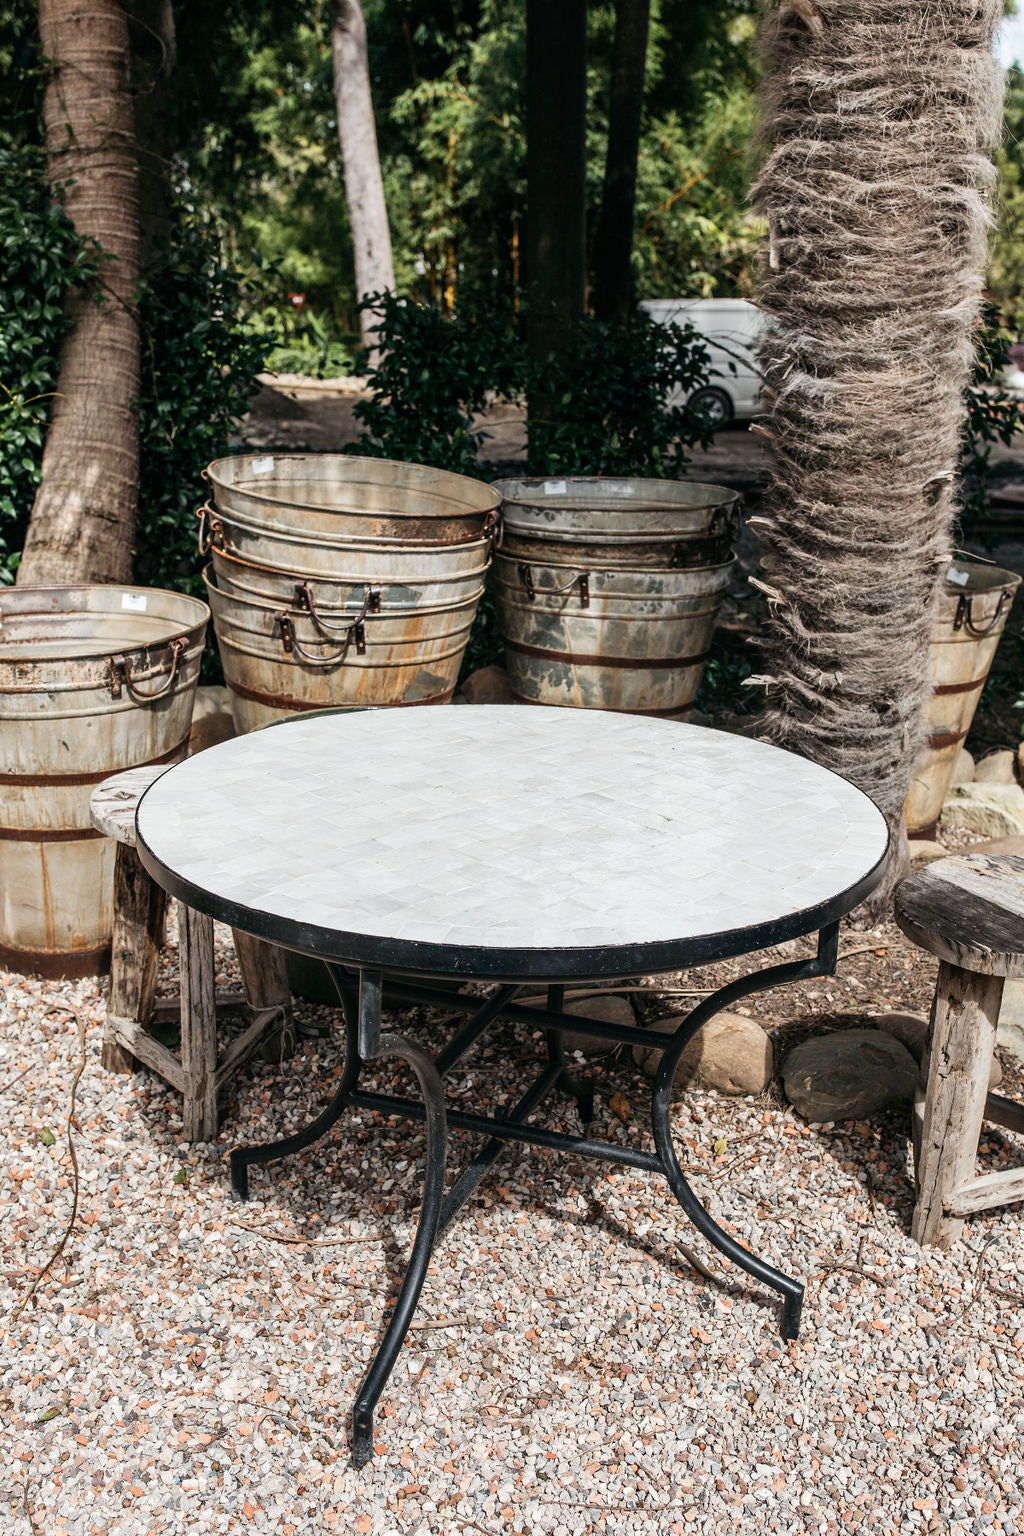 Moroccan Round Tiled Table Medium